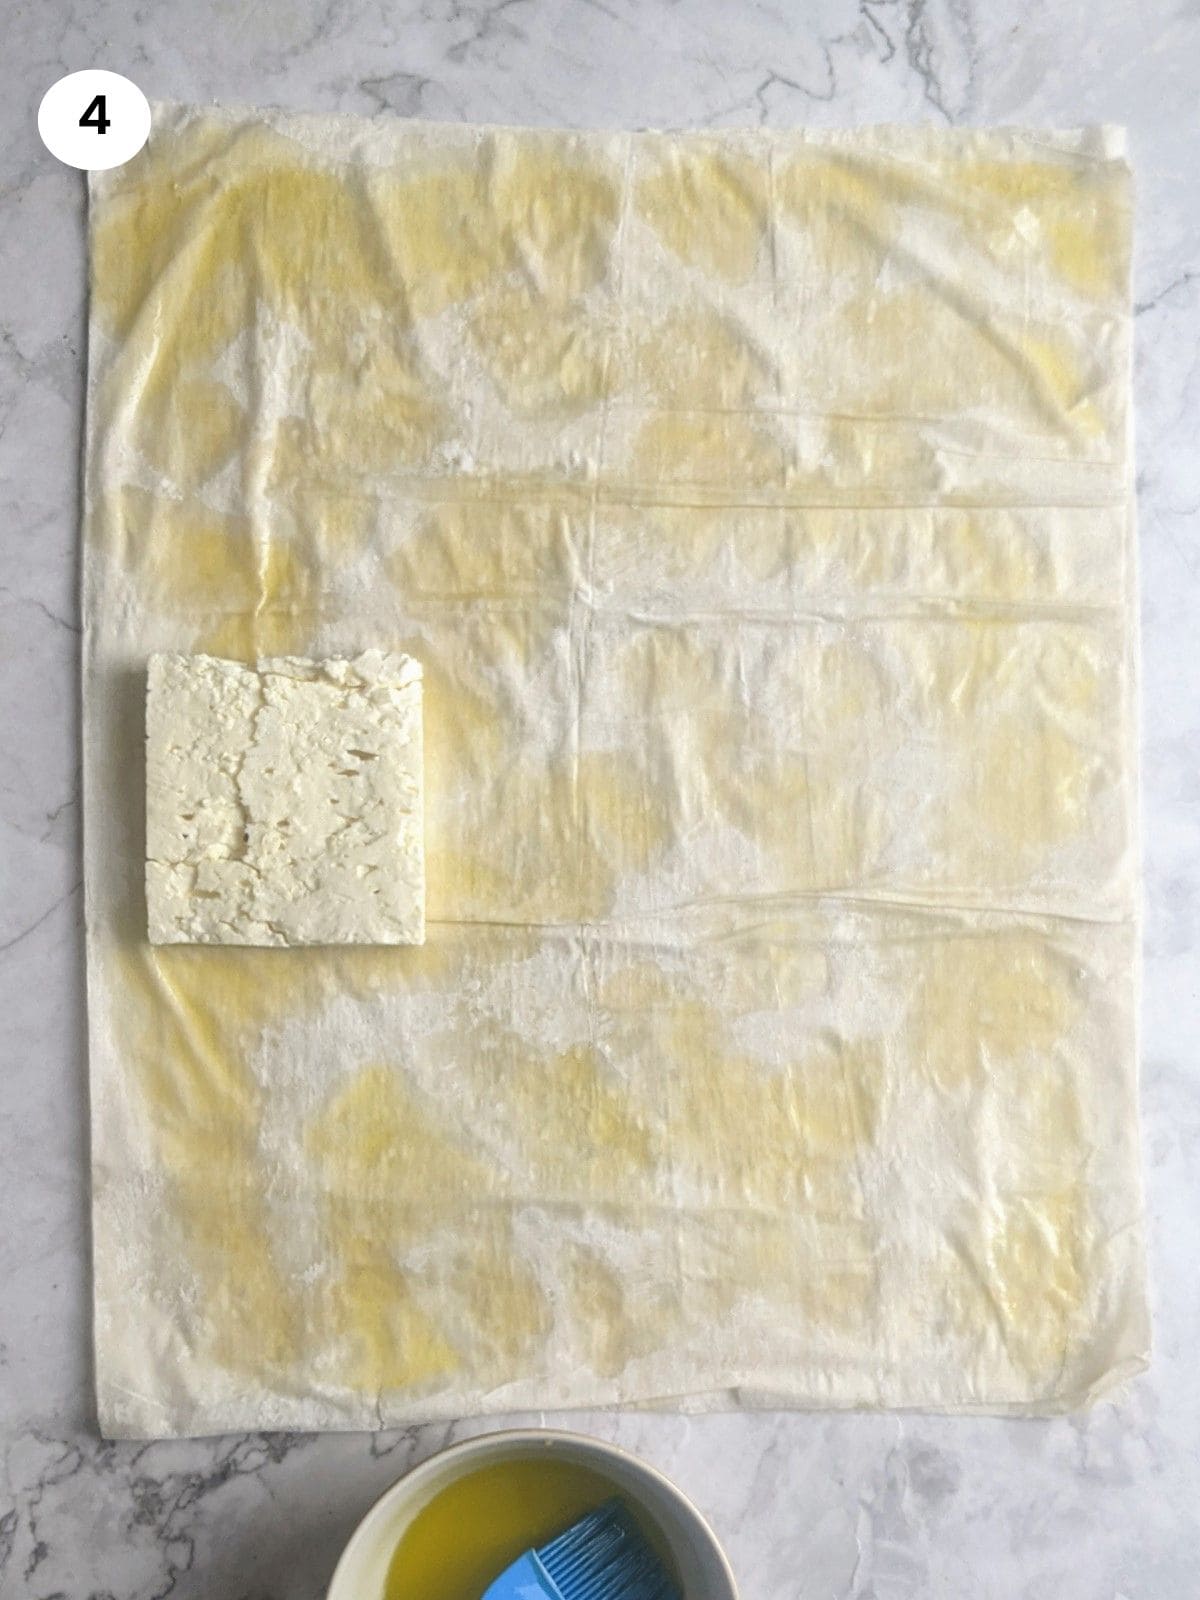 Placing the block of feta cheese at the bottom of the phyllo dough.